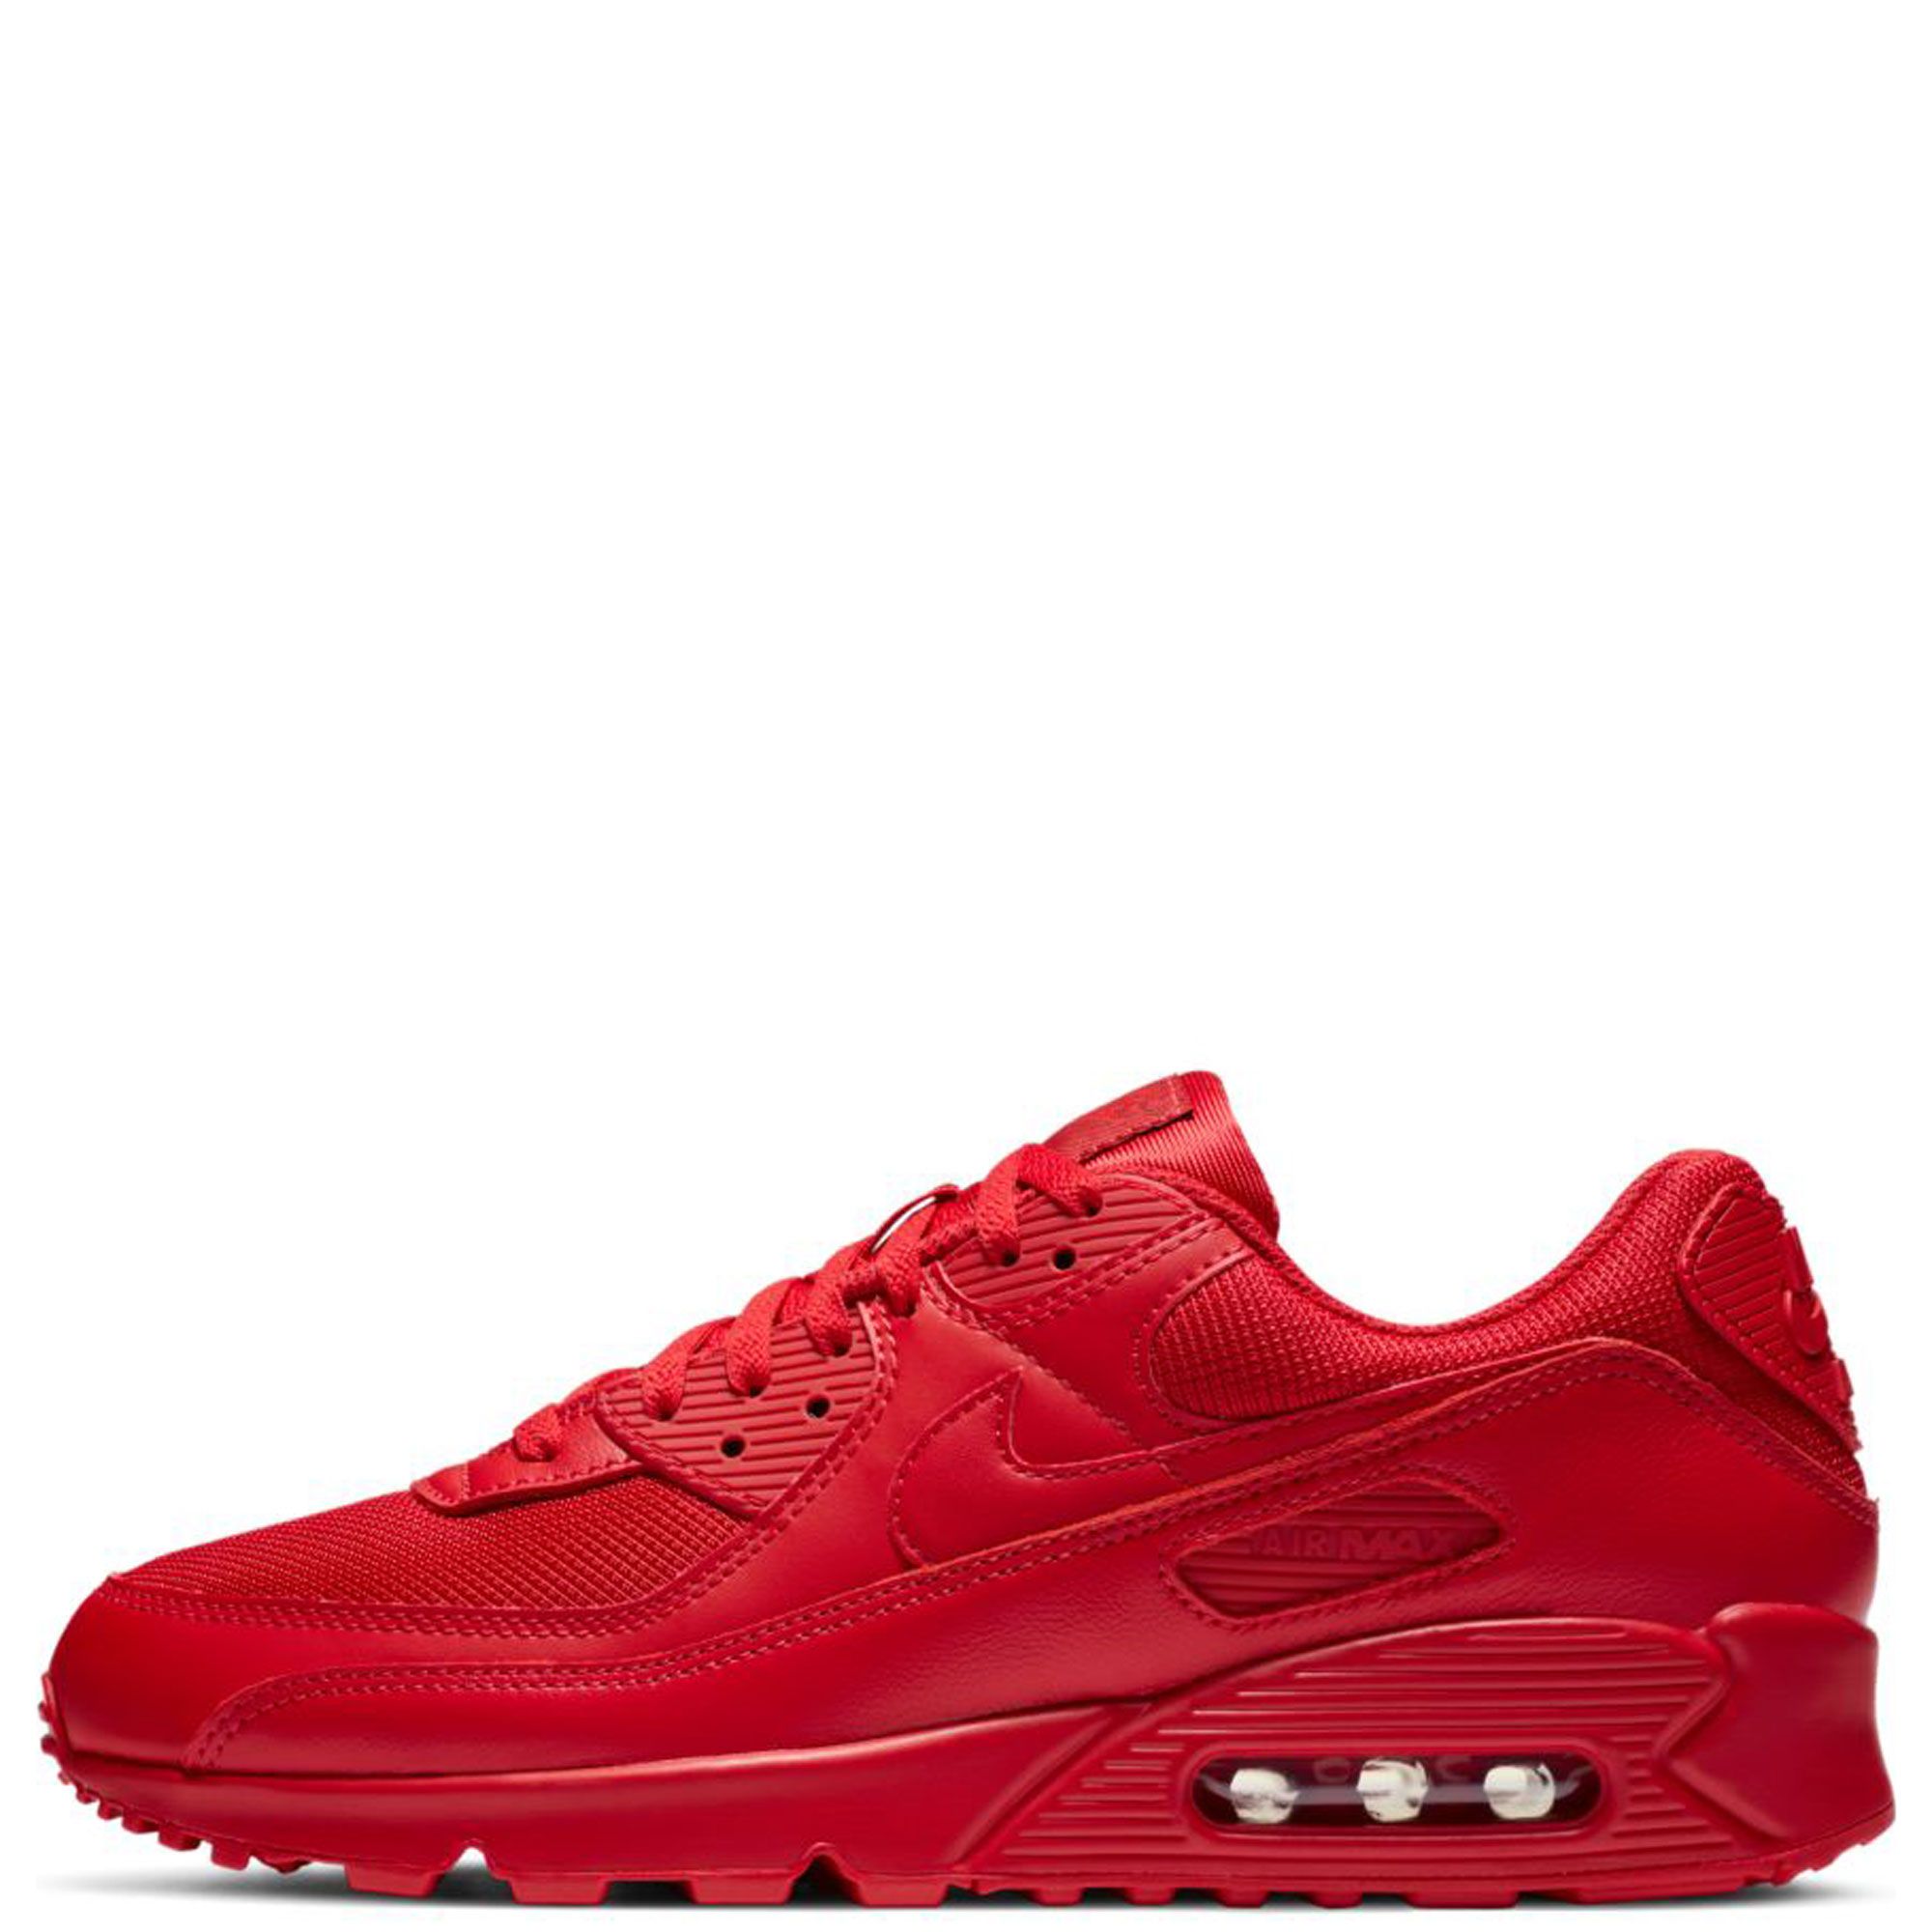 air max 90s red and black